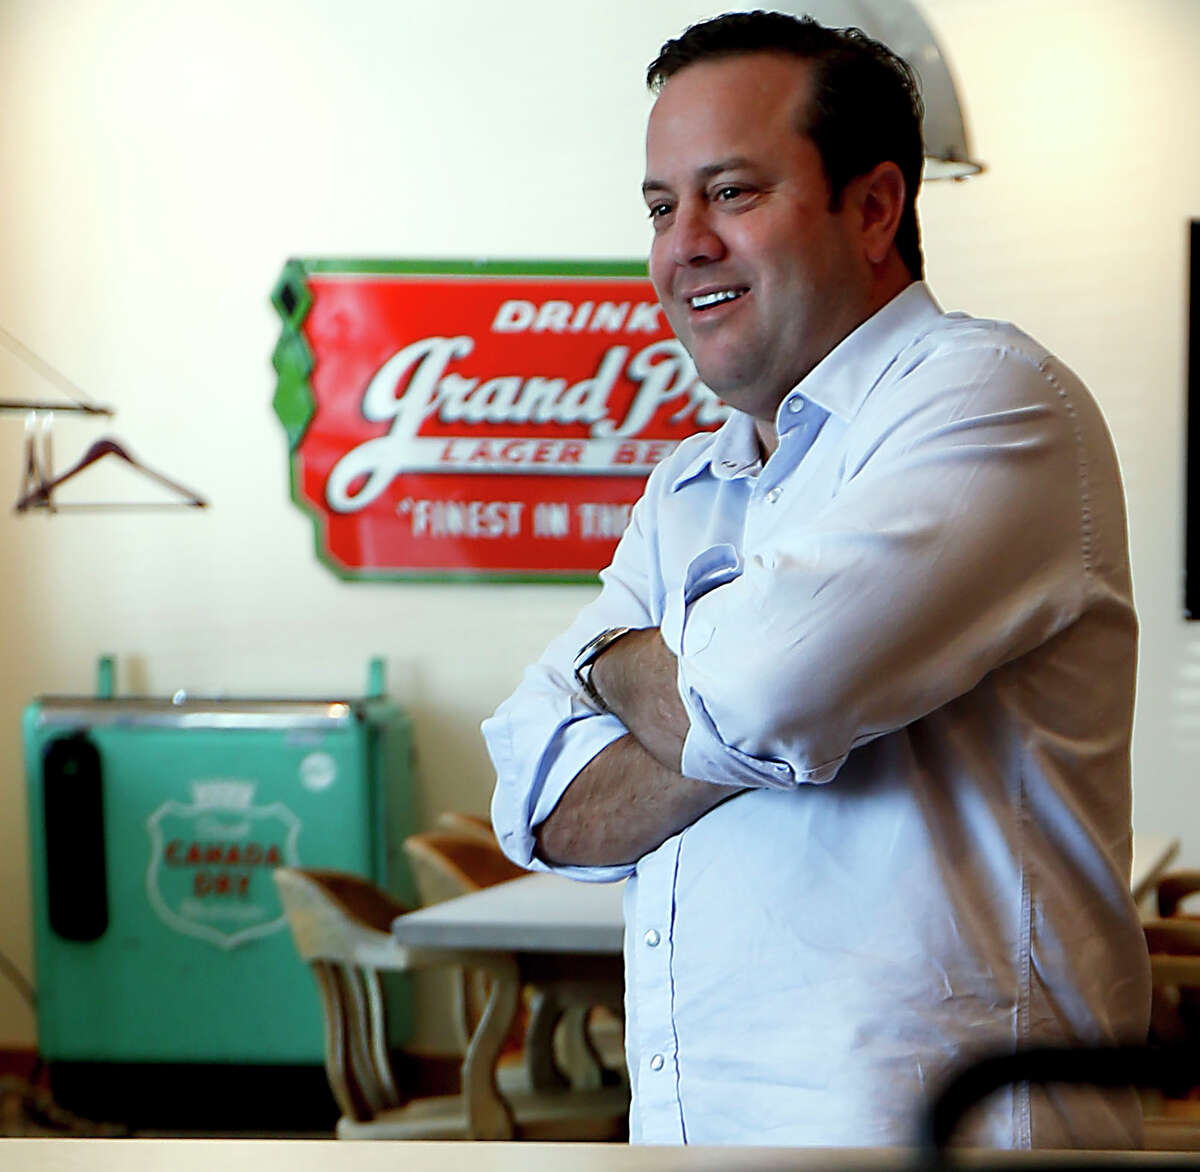 Goode Co. President Levi Goode in the company's test kitchen Wednesday, July 23, 2014, in Stafford. ( James Nielsen / Houston Chronicle )